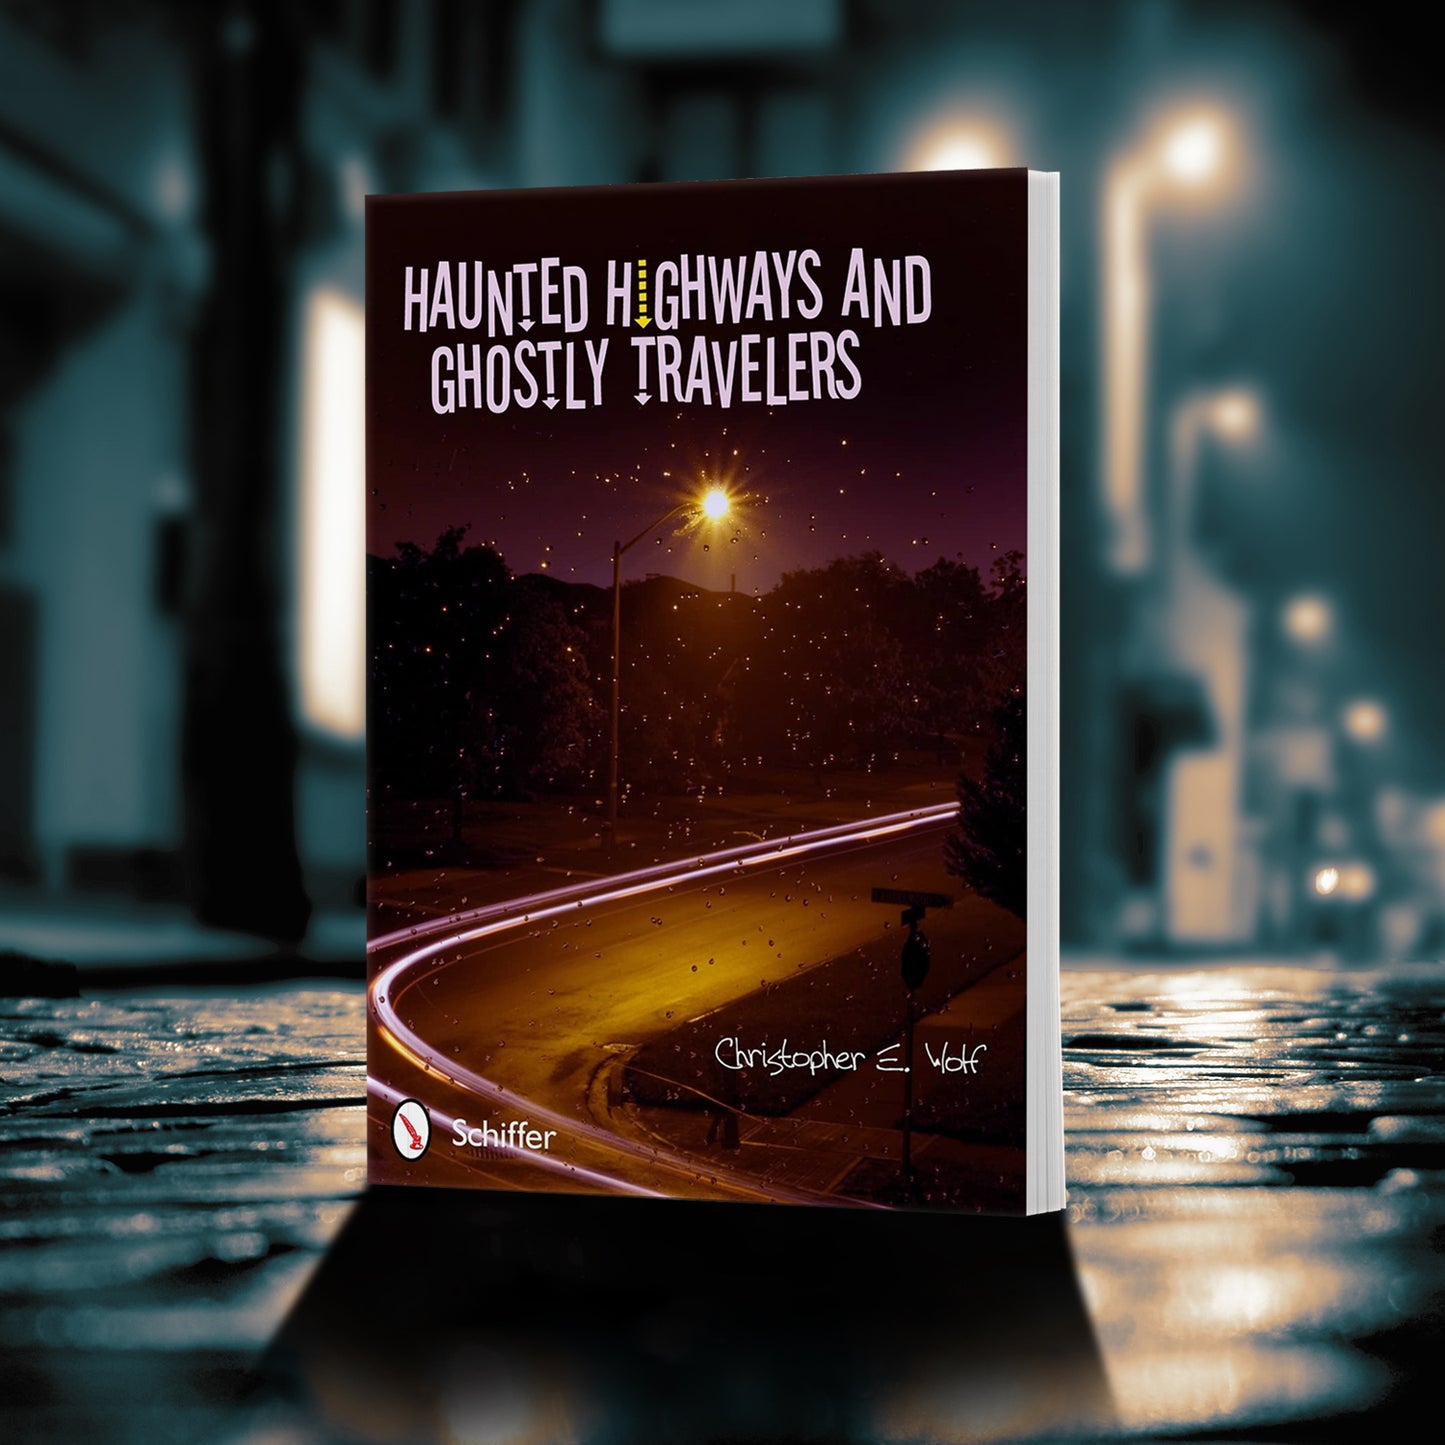 An image of a book standong on a dimly lit street. The cover image depicts a rainy street at night. At the top in white text is "haunted highways and ghostly travelers." 